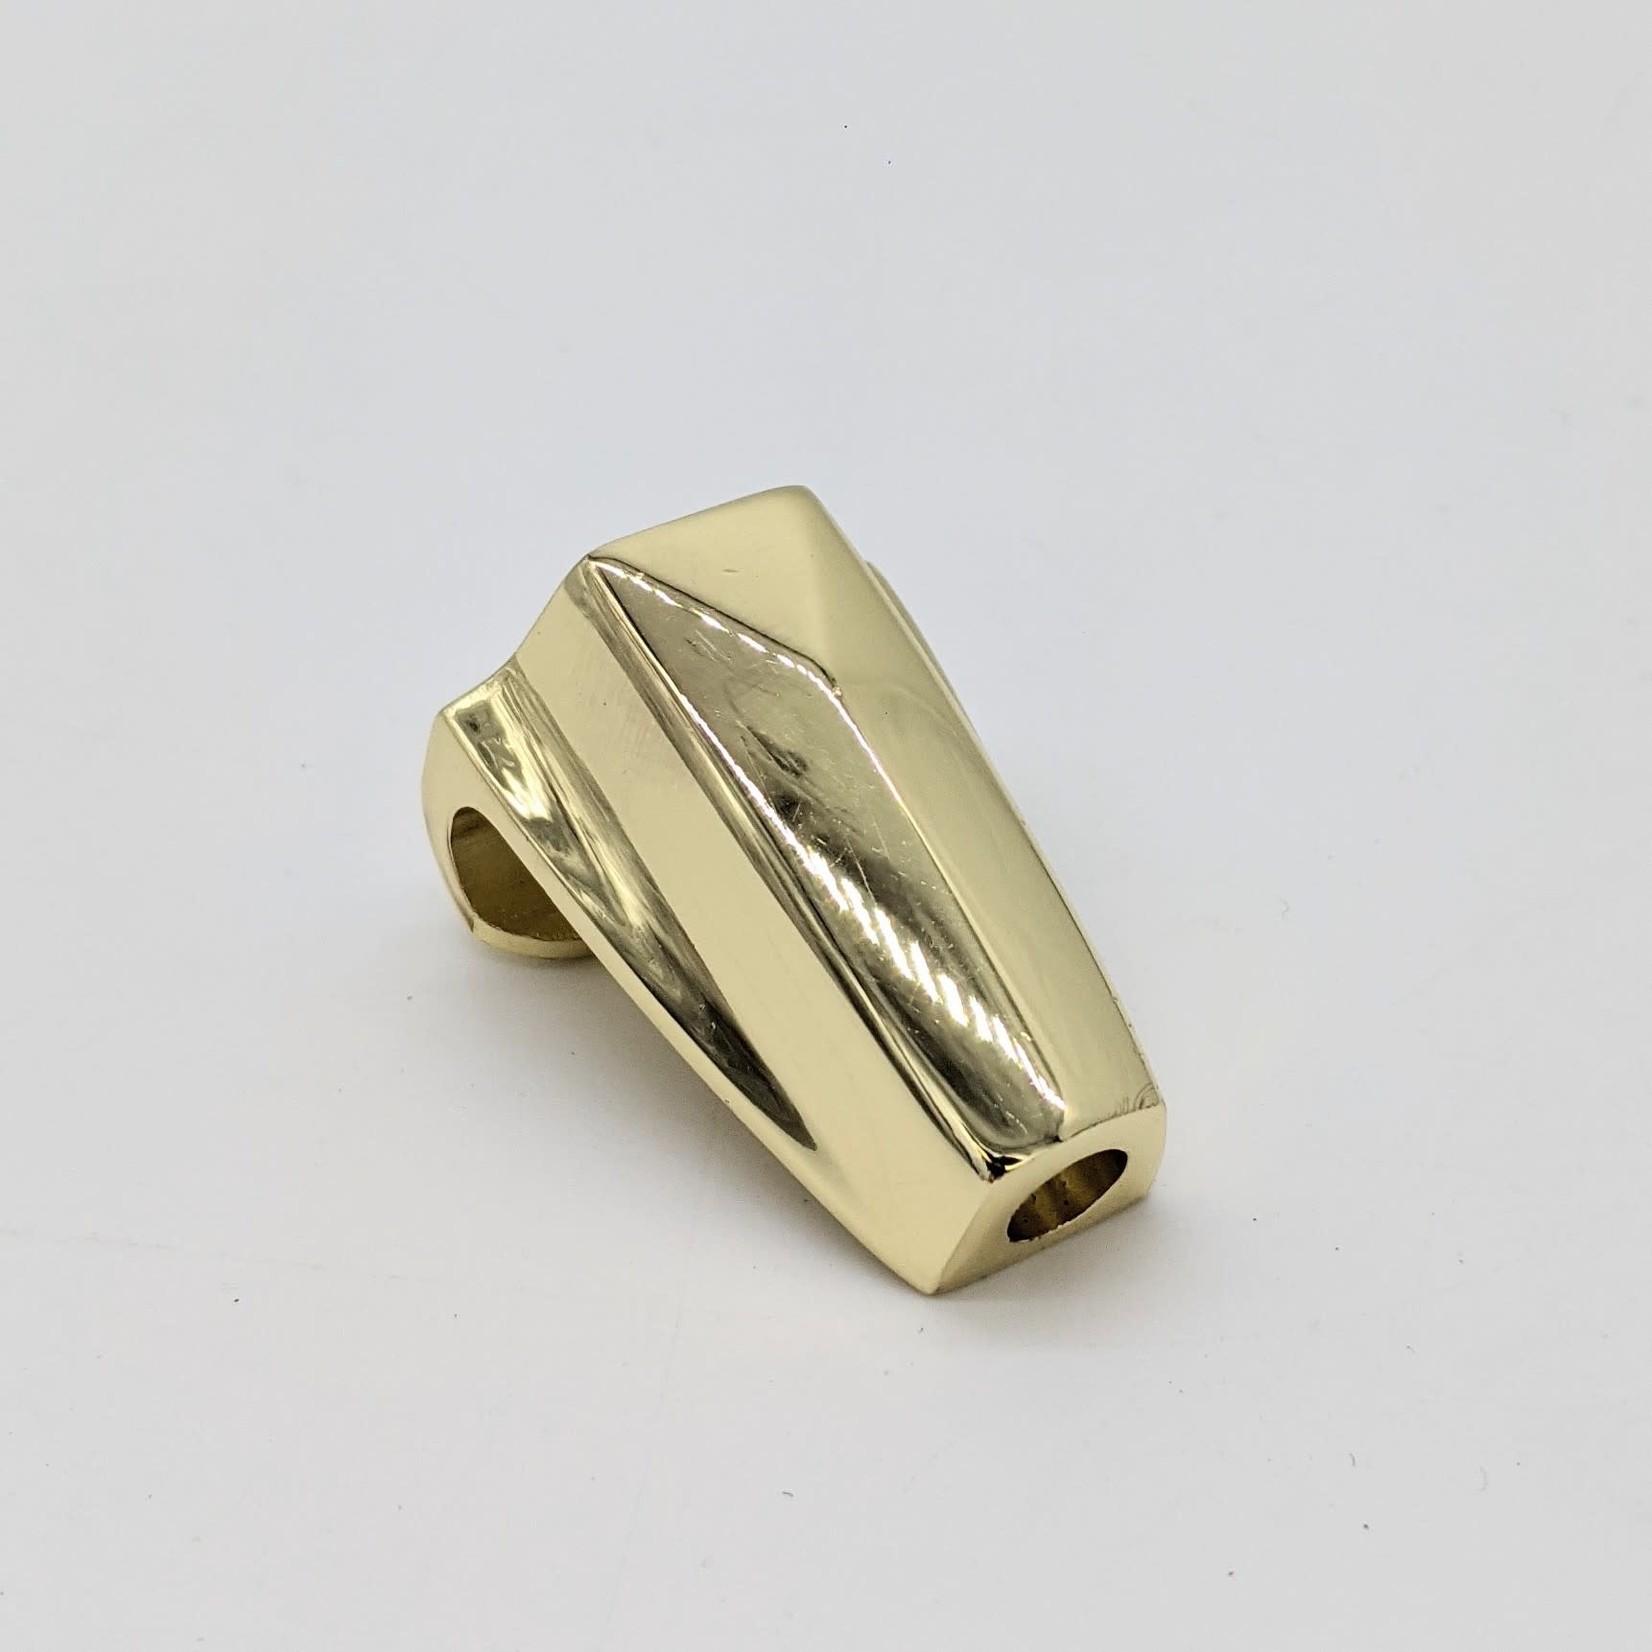 Pearl Gold Bass Drum Claw (Pearl Style)